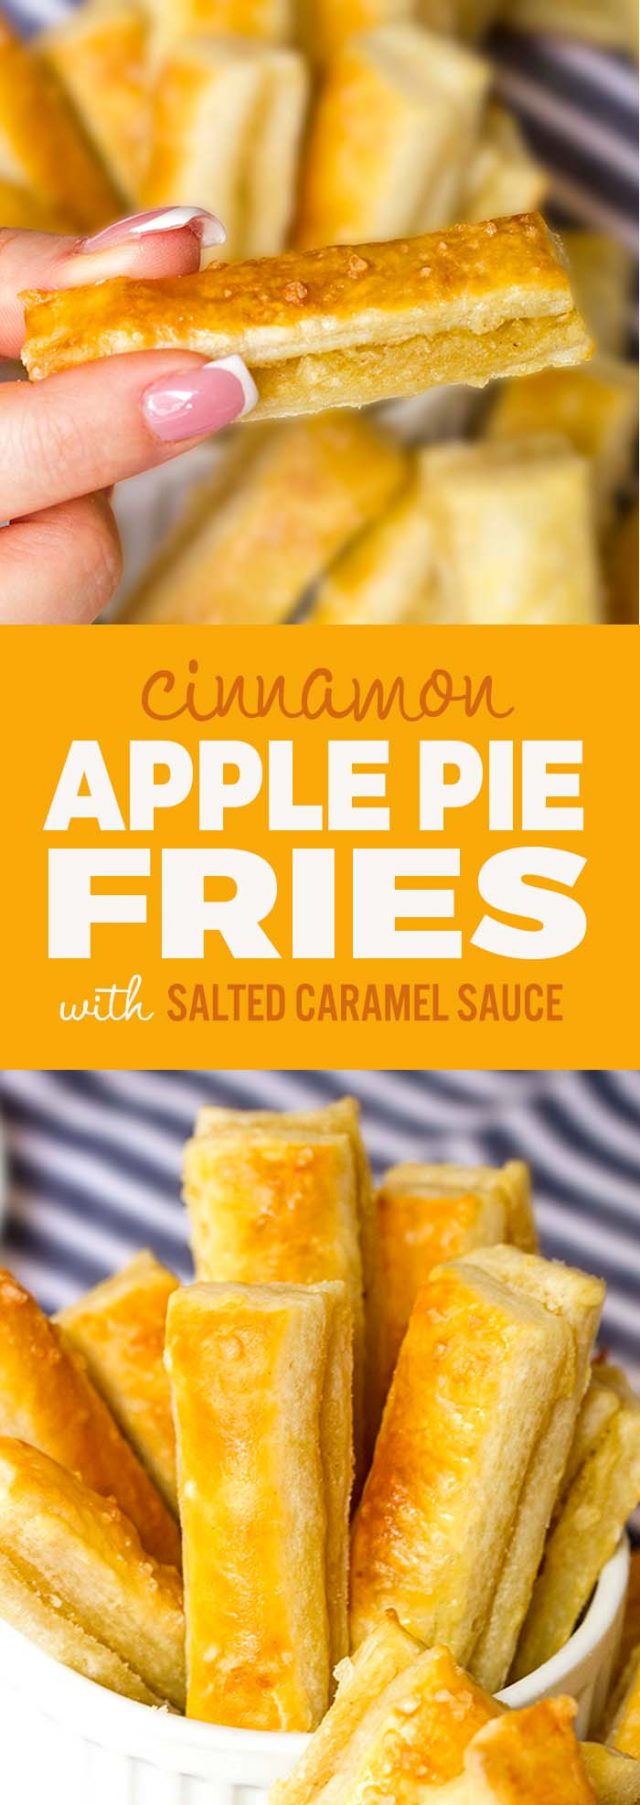 Yummy, crispy and healthy apple pie fries tossed with cinnamon sugar  #recipes #apple #fries